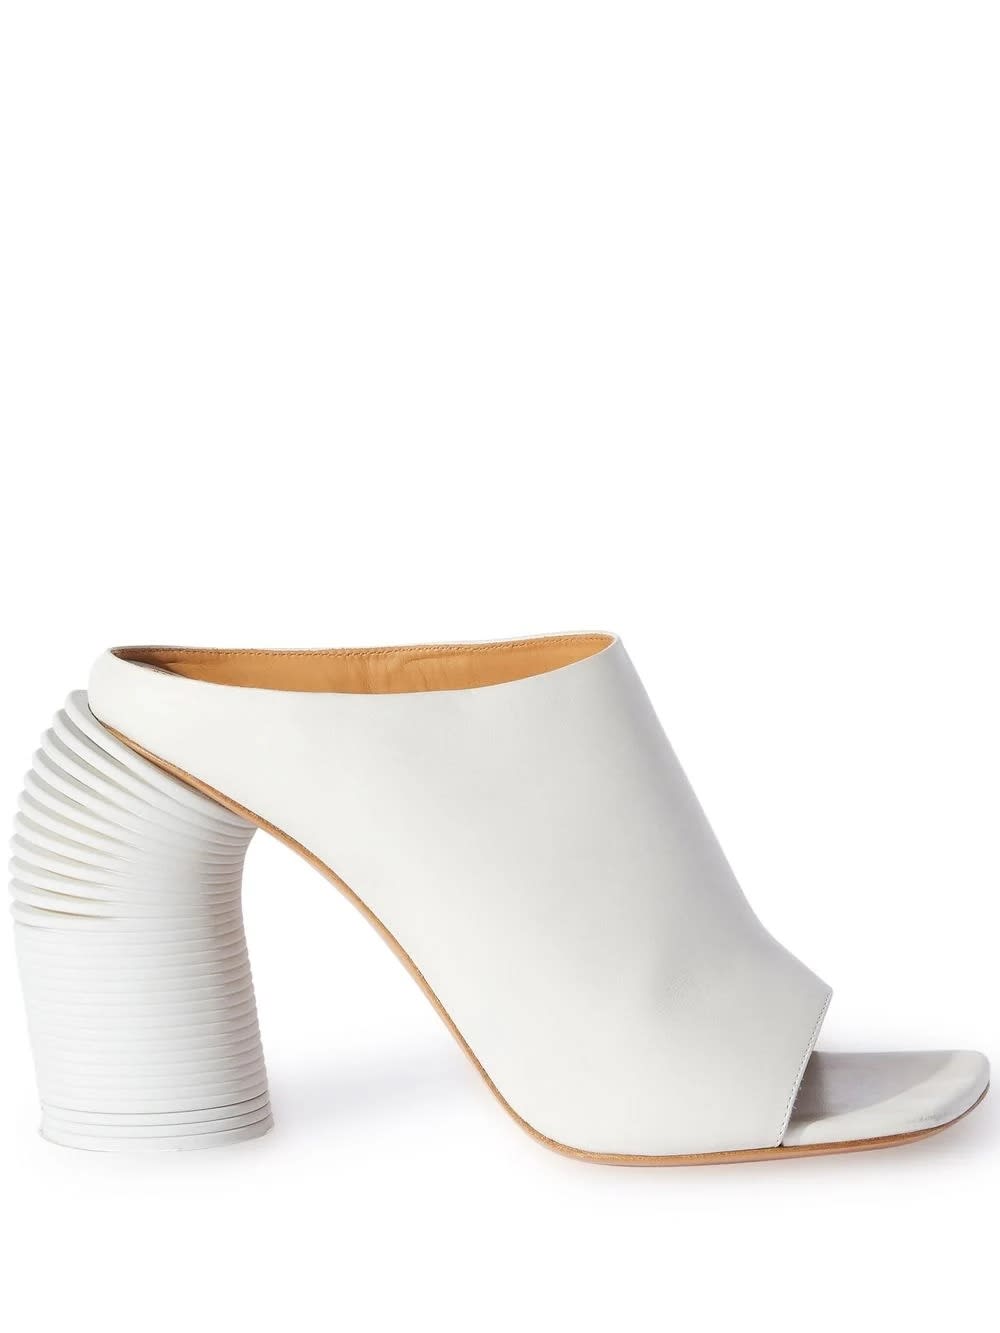 OFF-WHITE OFF-WHITE LEATHER MULES WITH SPRING HEEL